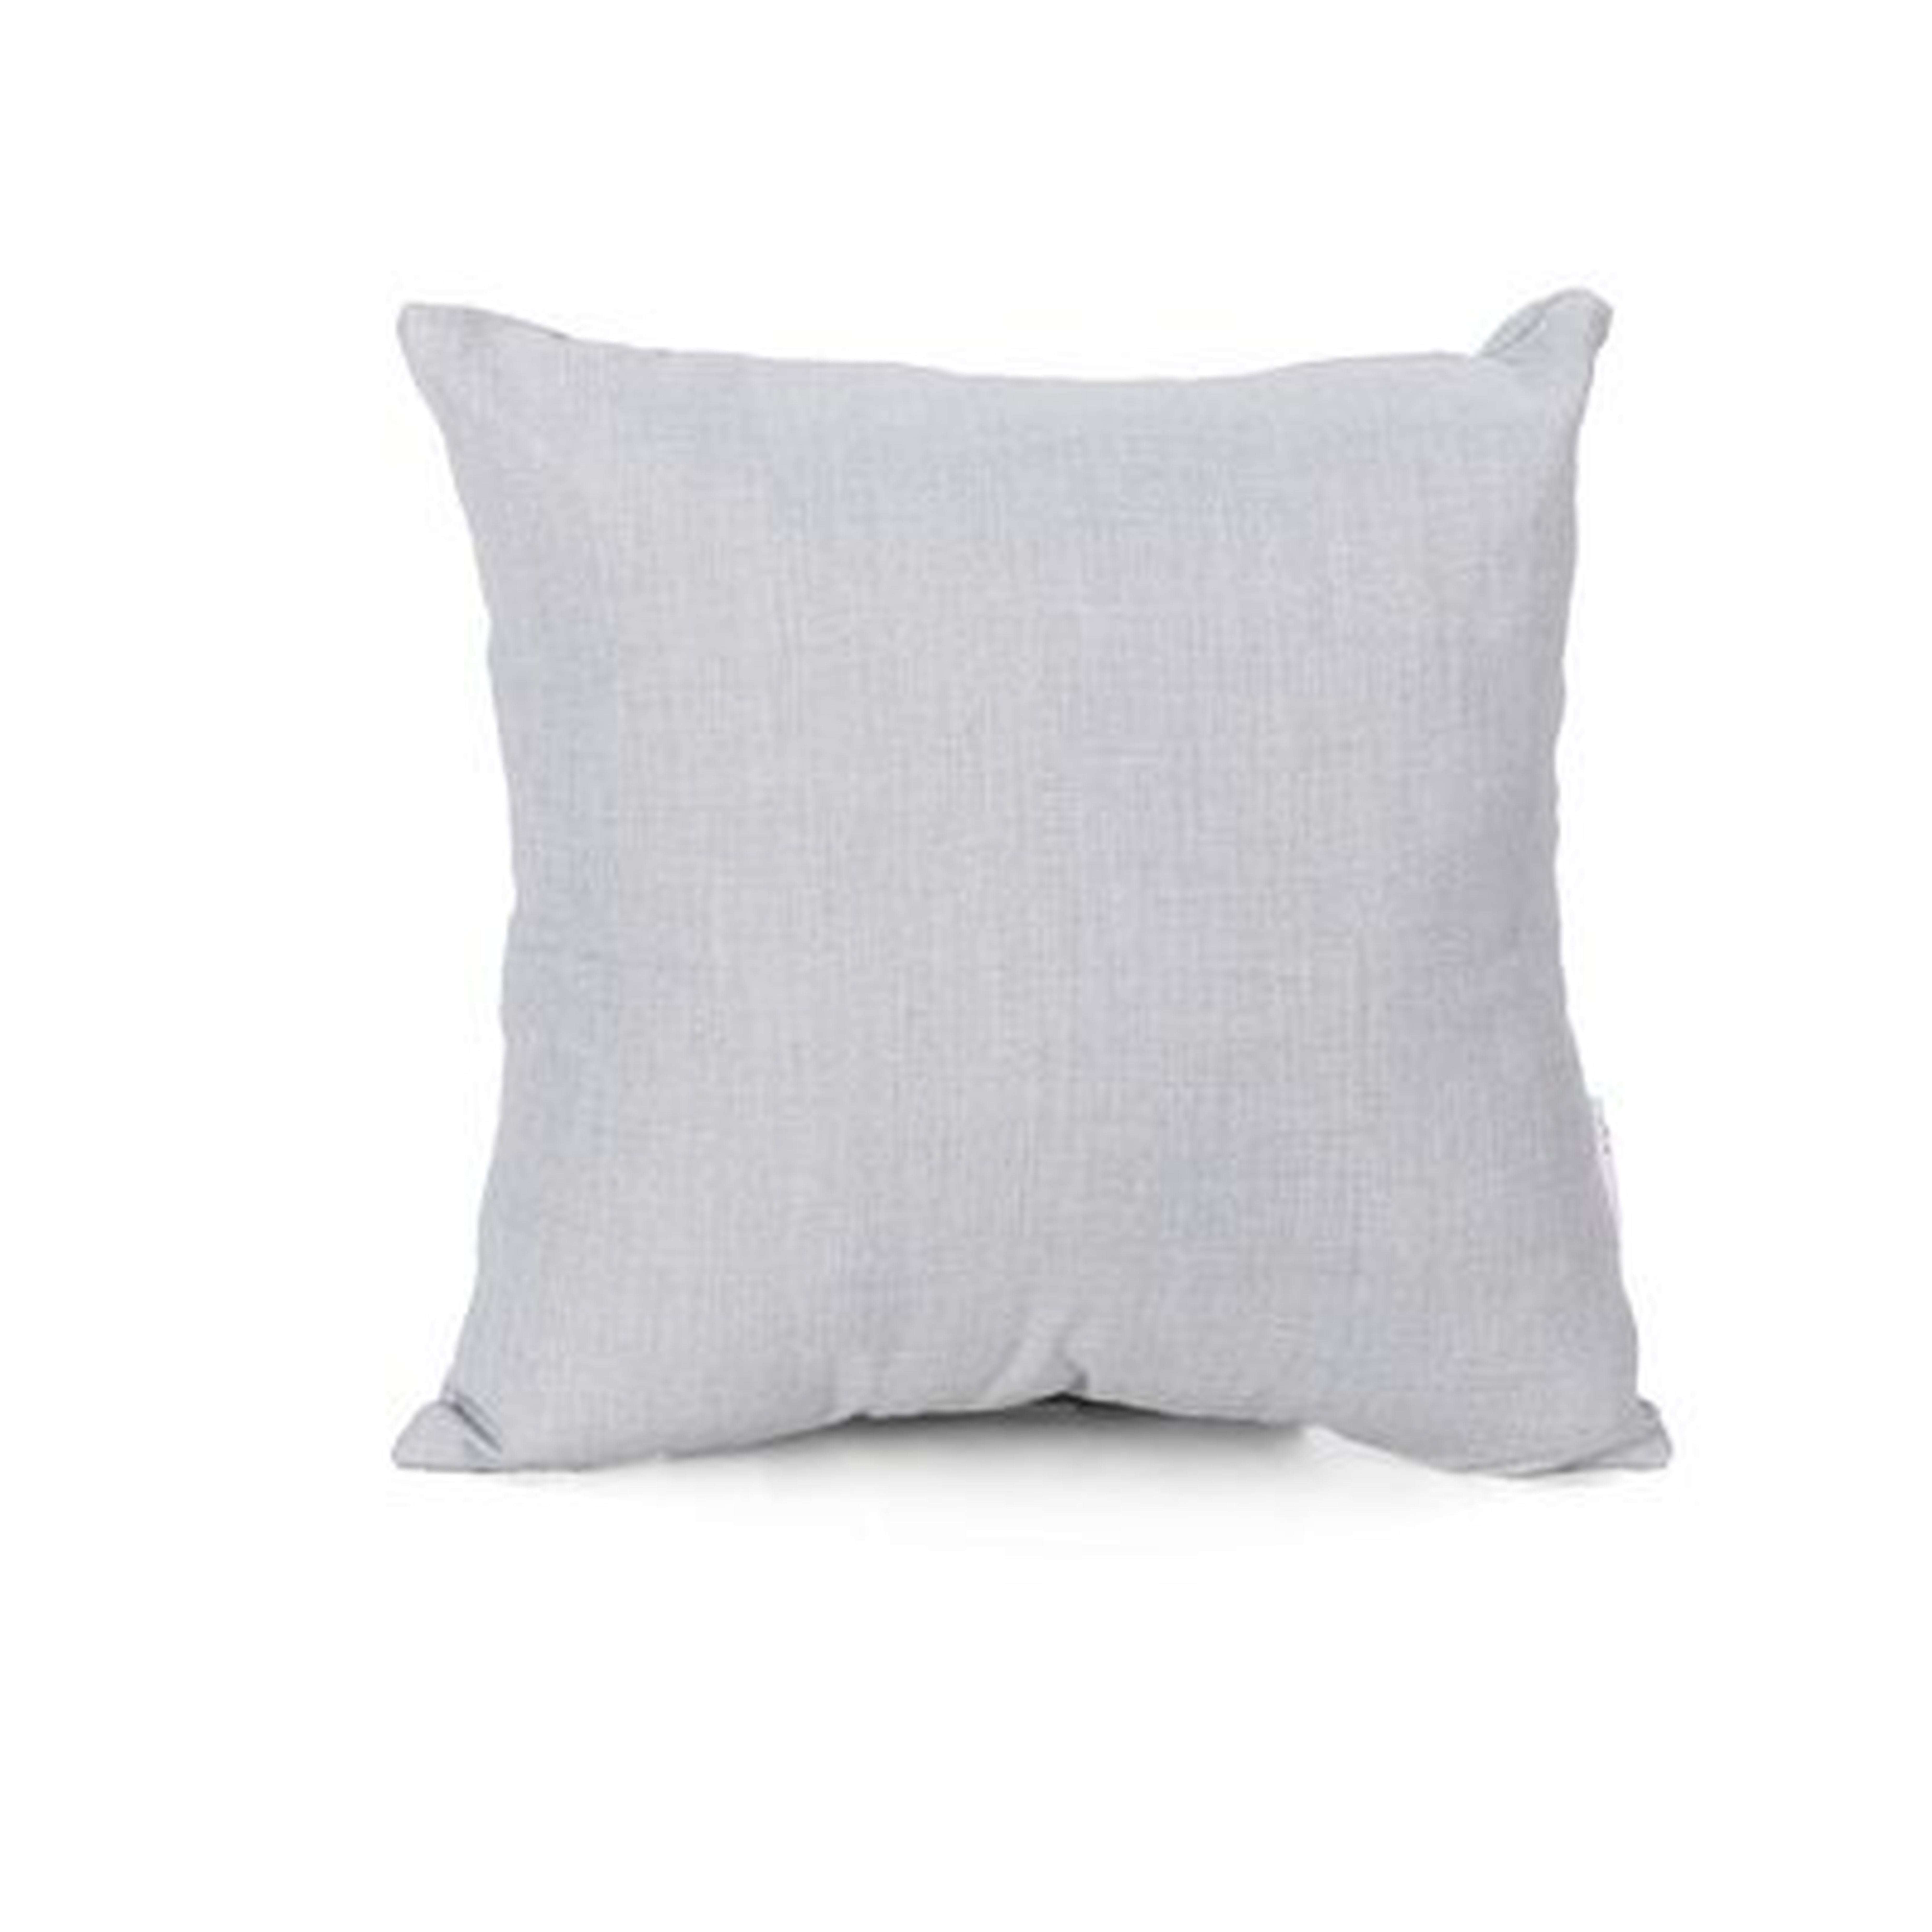 Lysia Outdoor Modern Square Water Resistant Fabric Pillow (Set of 2) - Wayfair